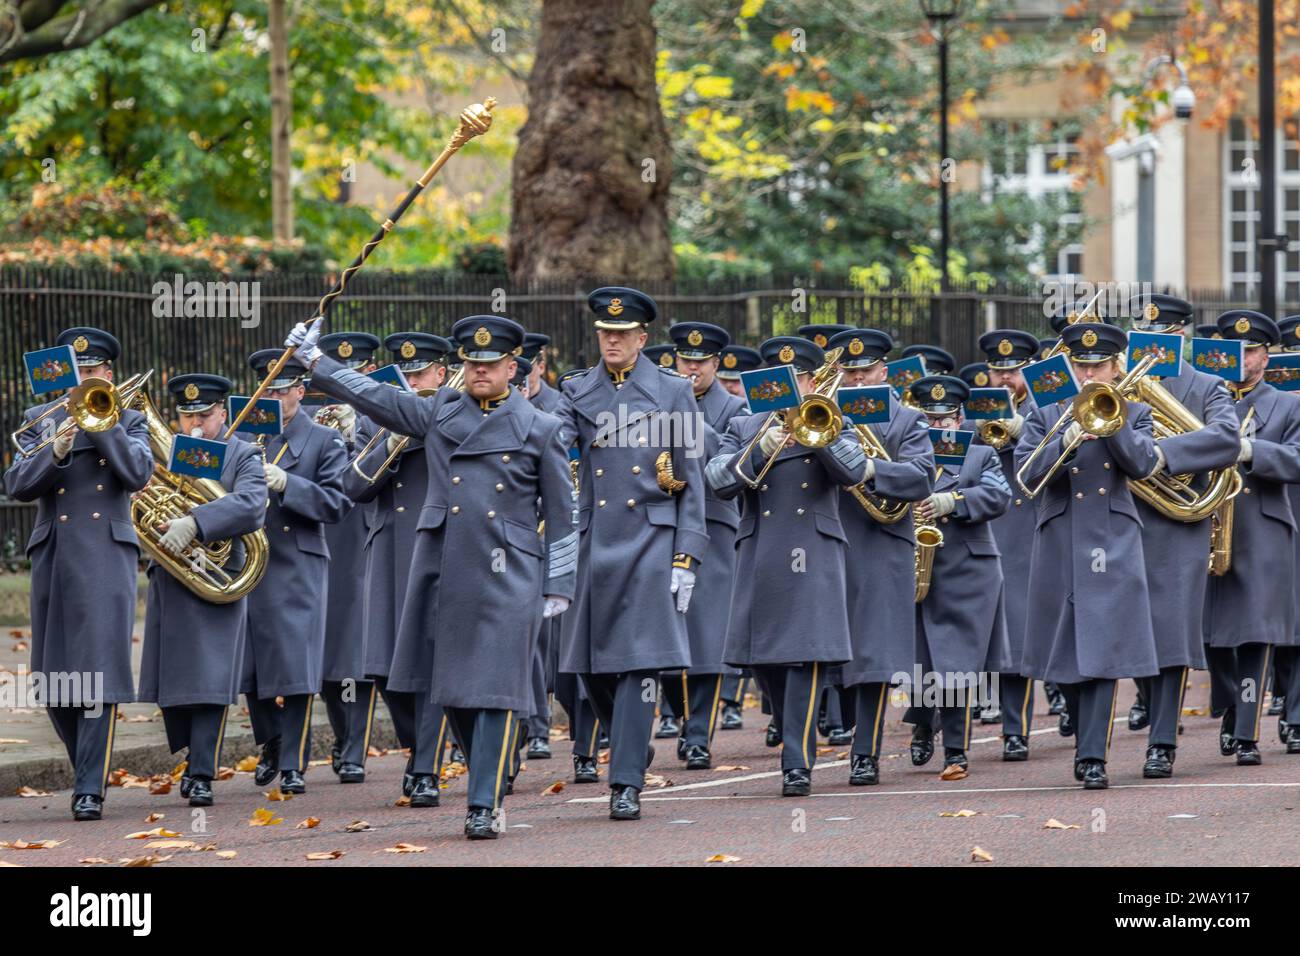 Central Band of the Royal Air Force, Birdcage Walk, London, UK Stock Photo